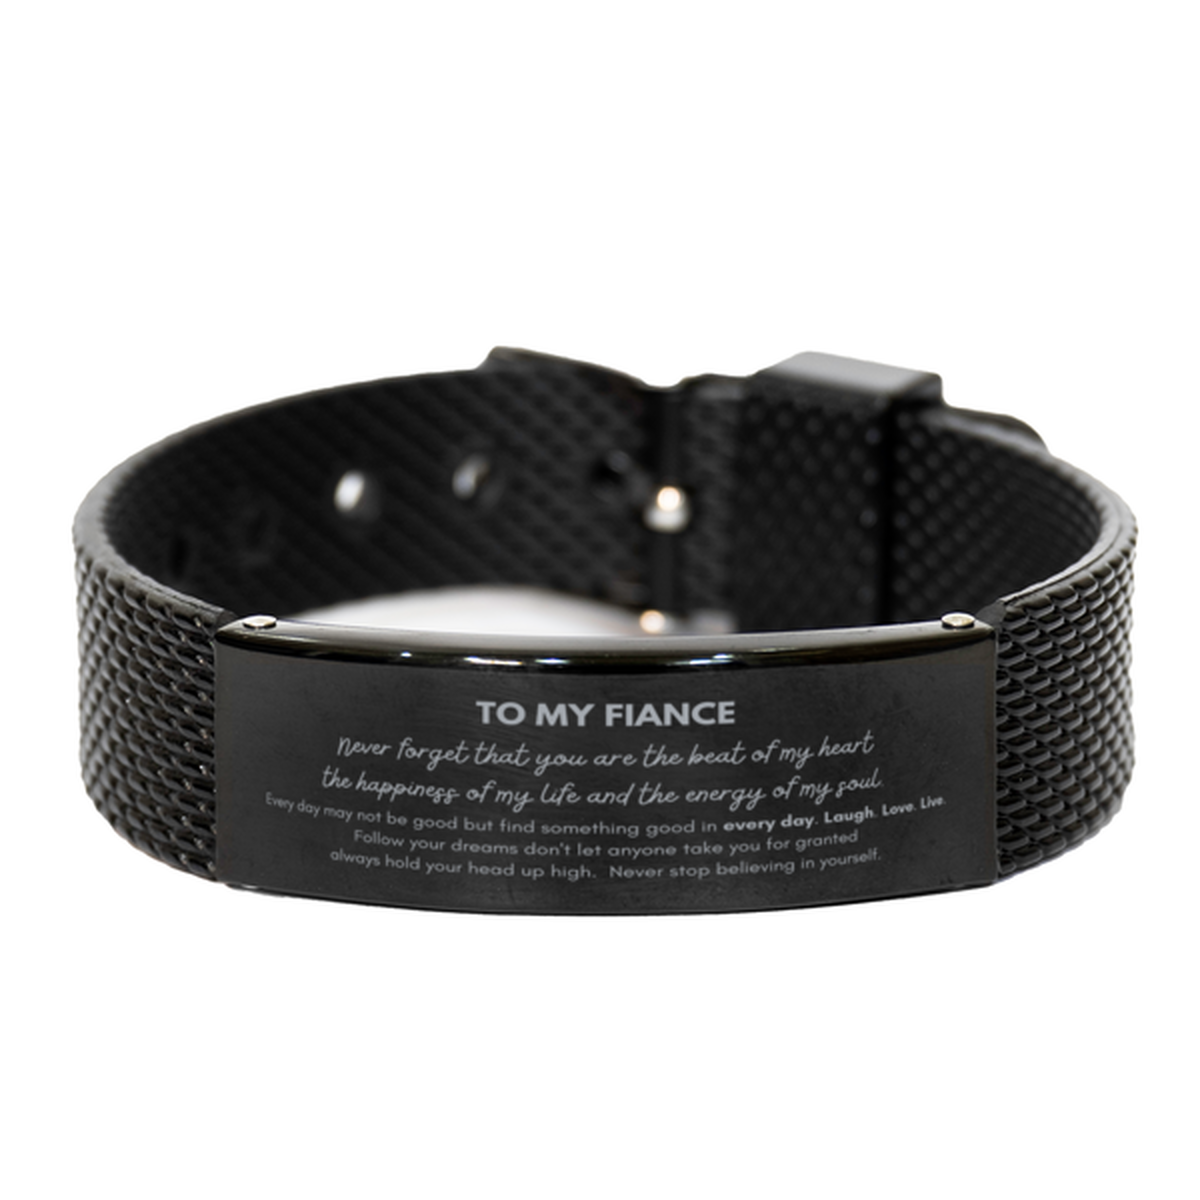 To My Fiance Bracelet Gifts, Christmas Fiance Black Shark Mesh Bracelet Present, Birthday Unique Motivational For Fiance, To My Fiance Never forget that you are the beat of my heart the happiness of my life and the energy of my soul